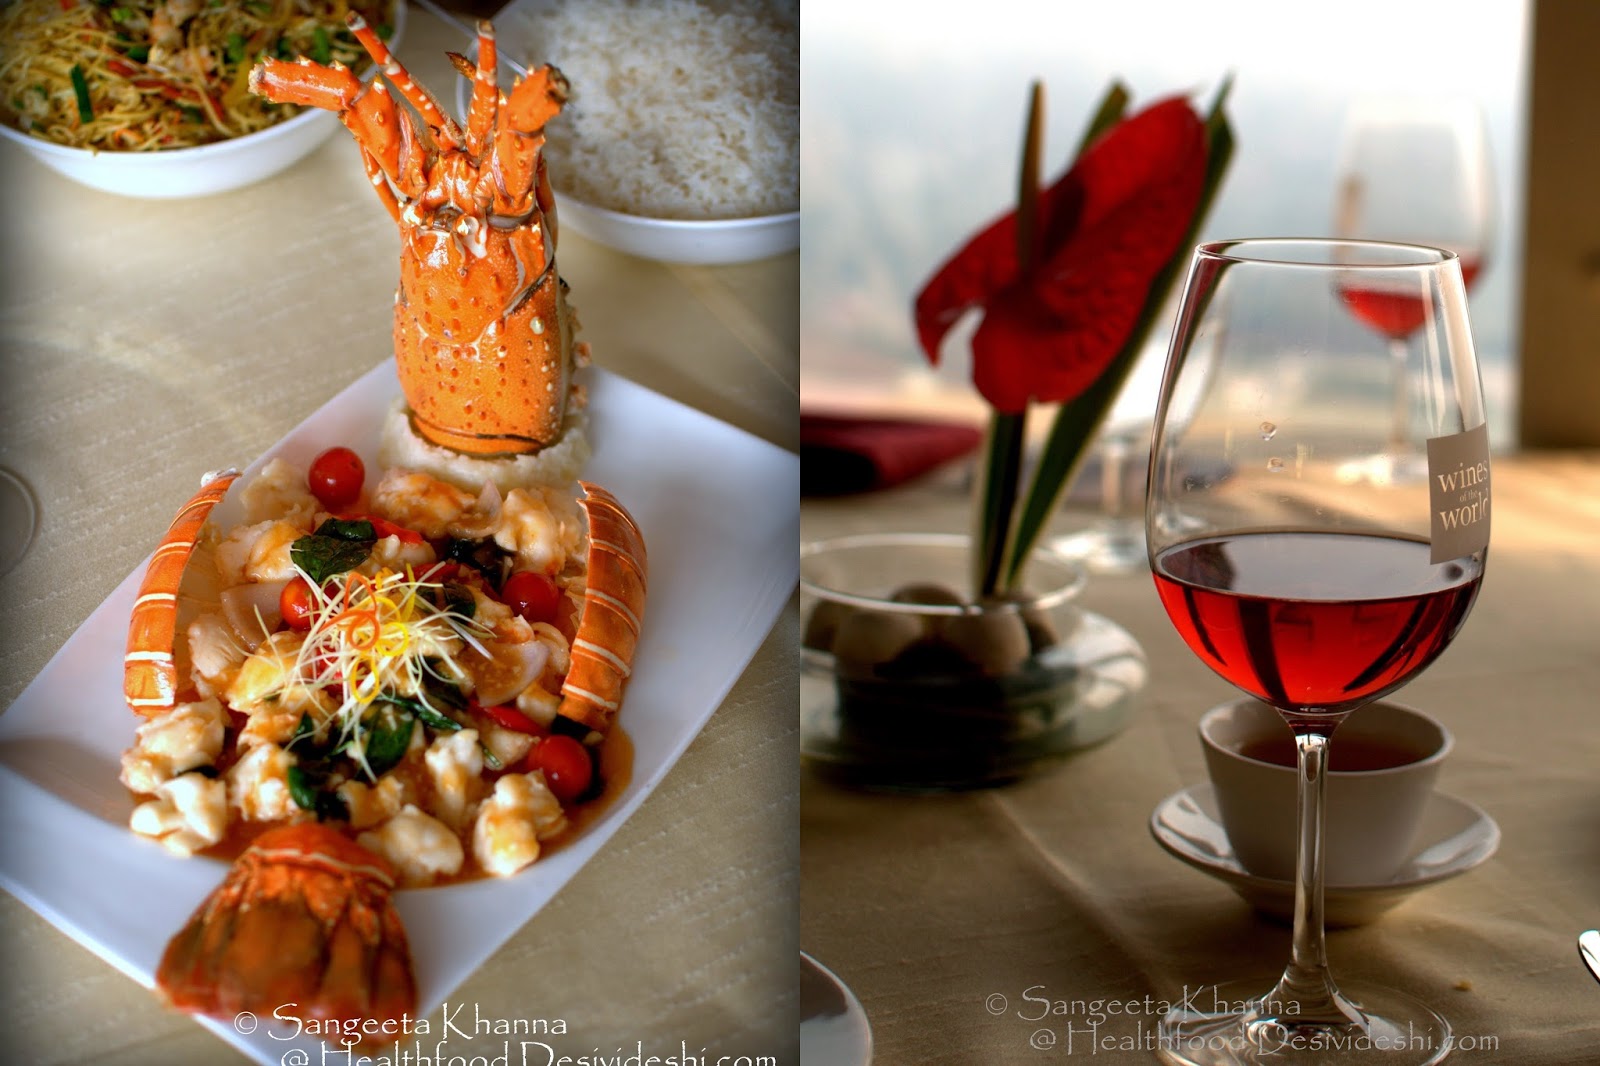 seafood promotion at the rooftop restaurant - Le Bevedere at Le Meridien and a recipe of king scallop in chilly bean sauce